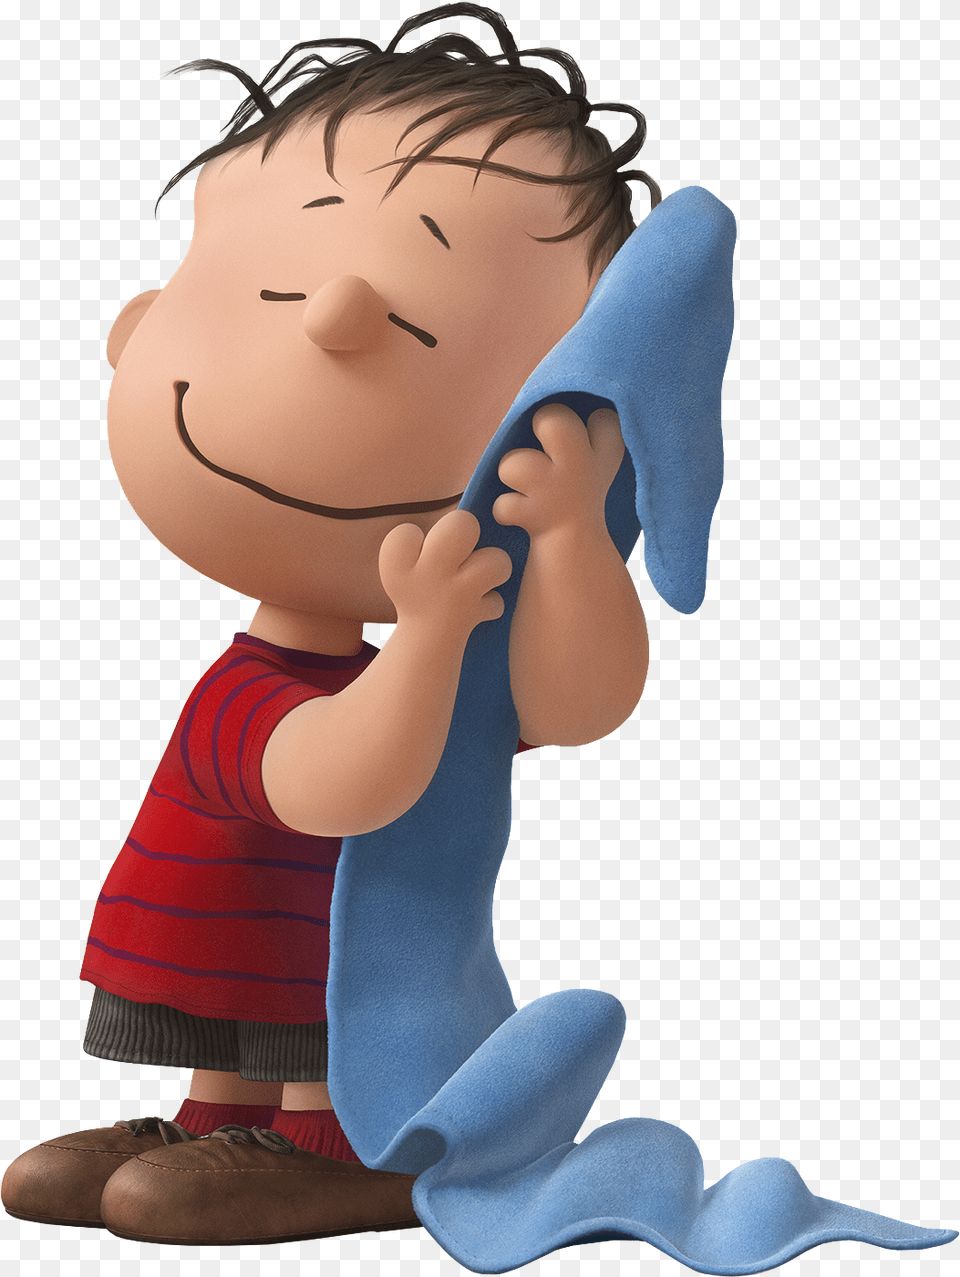 Peanuts Clipart School Linus The Peanuts Movie, Body Part, Finger, Person, Hand Png